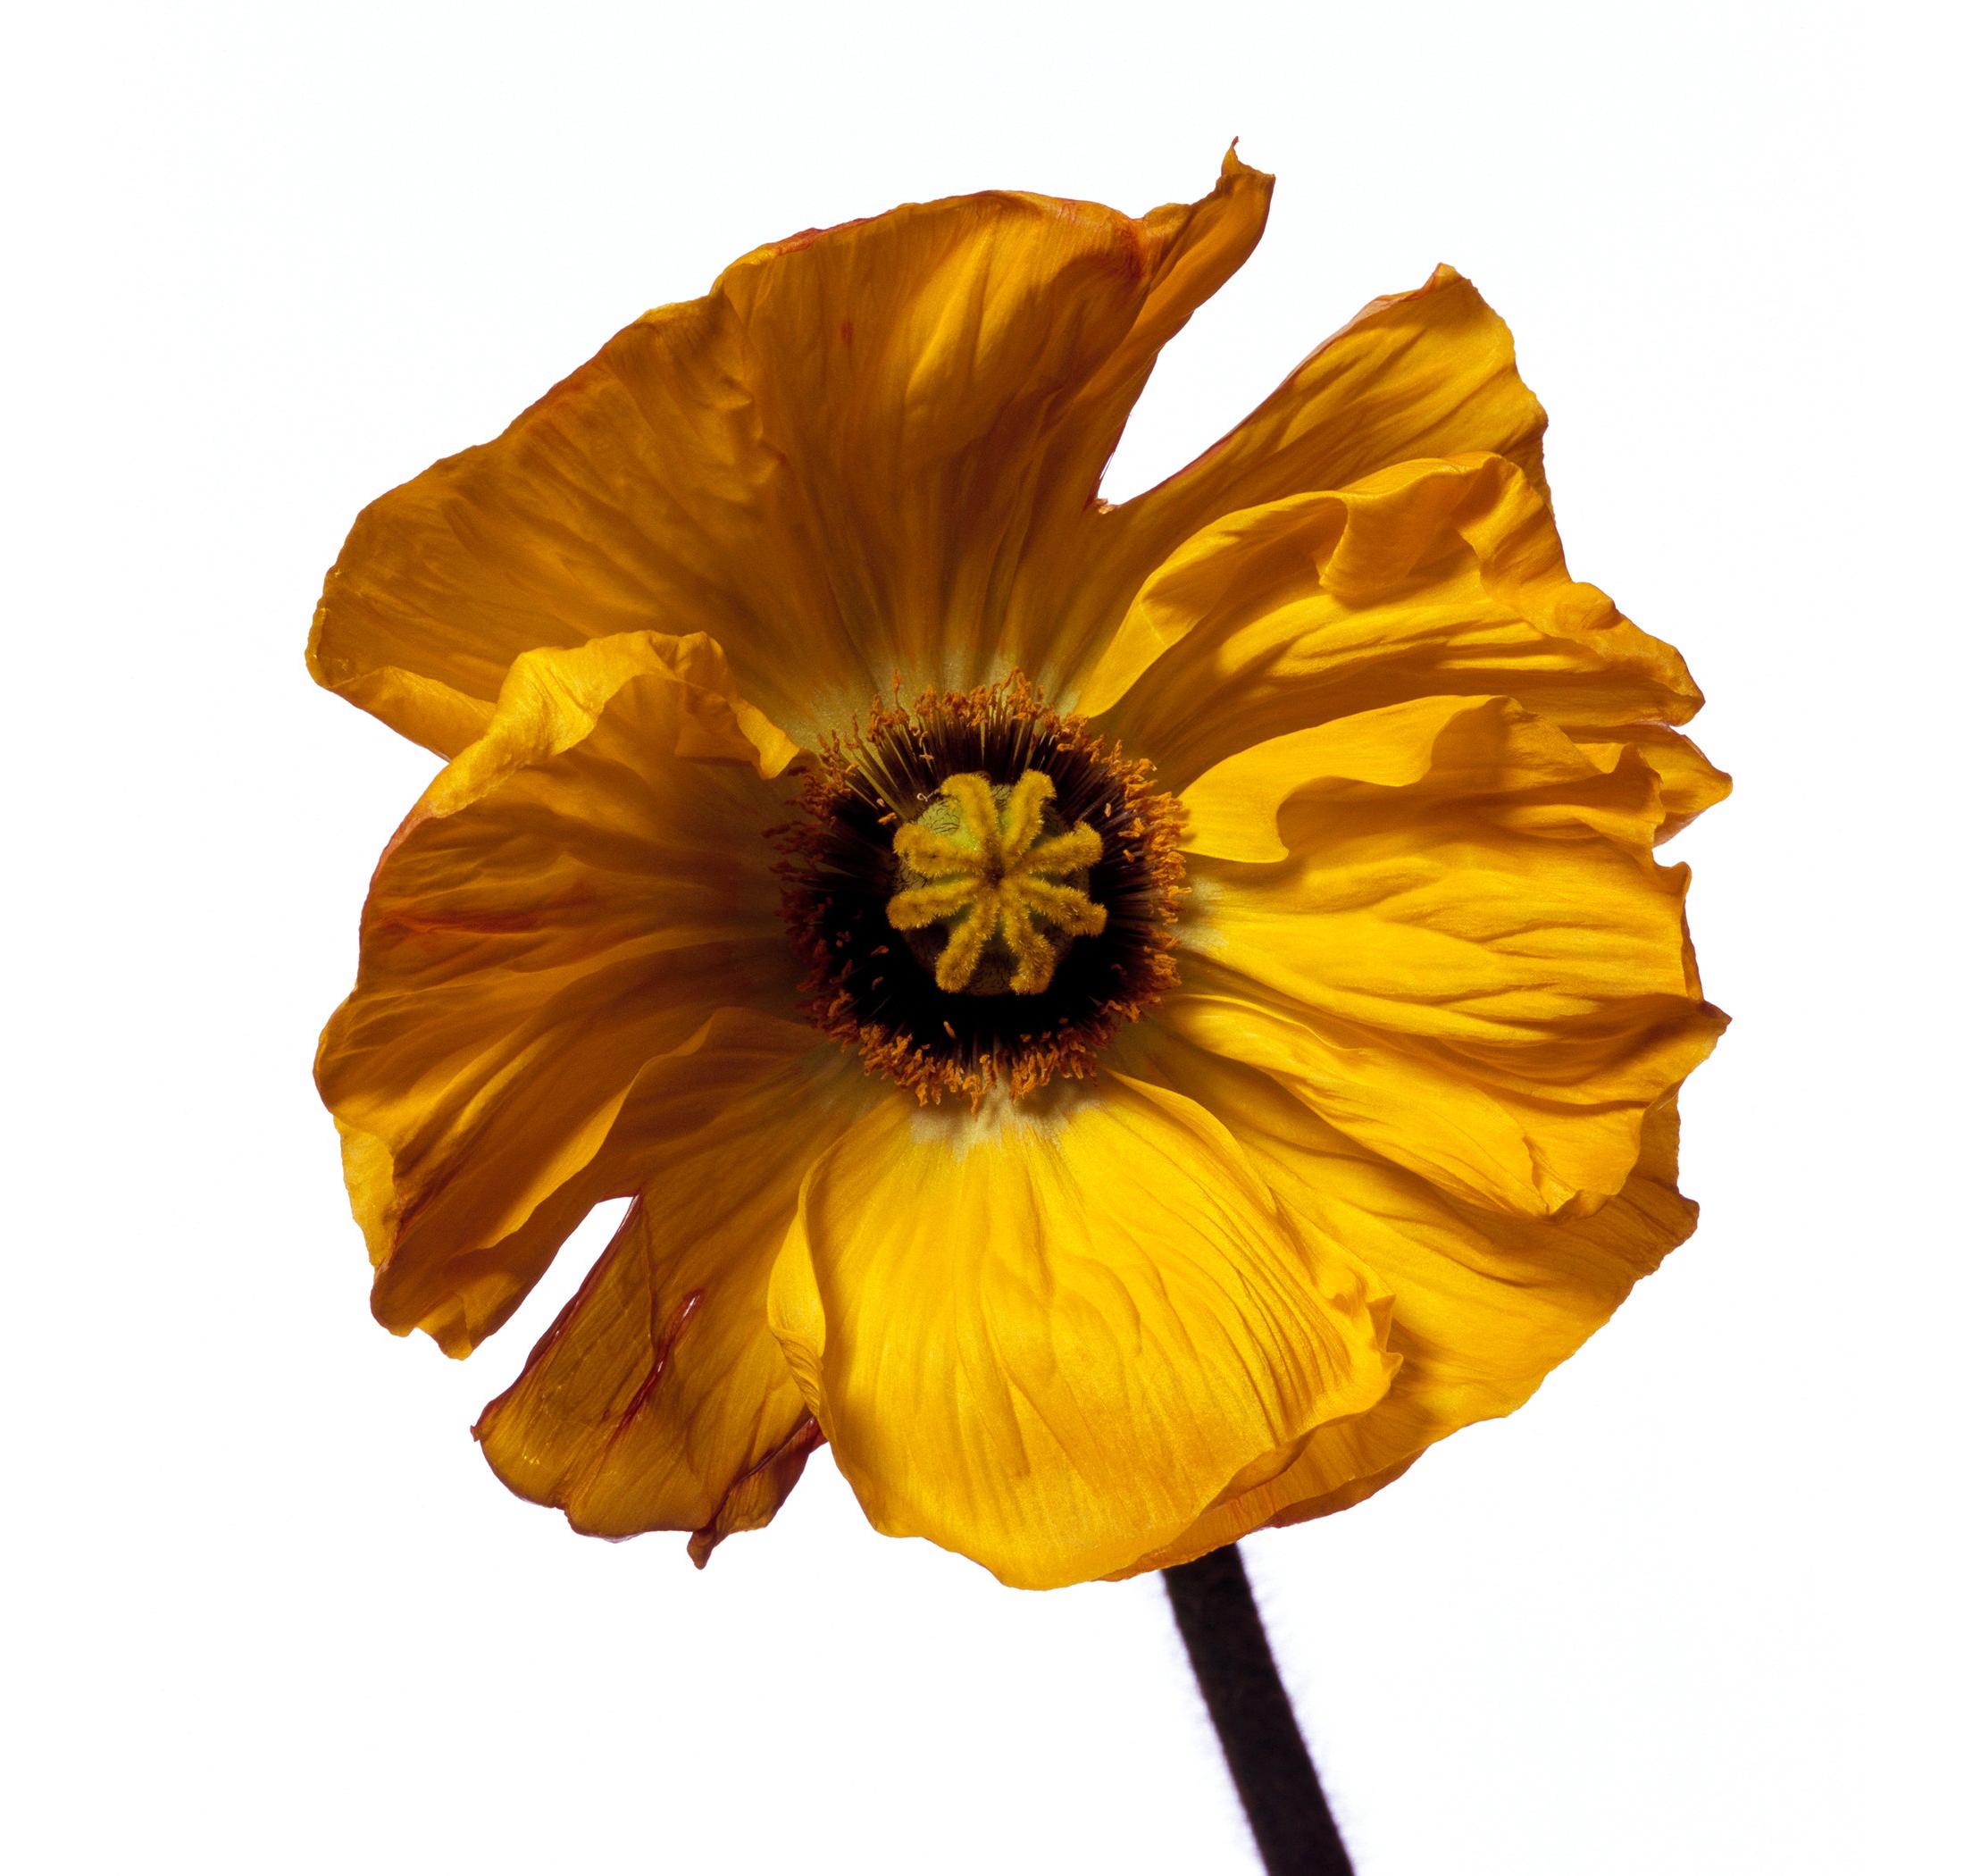 Iceland Poppy 'Y' by Michael Zeppetello For Sale